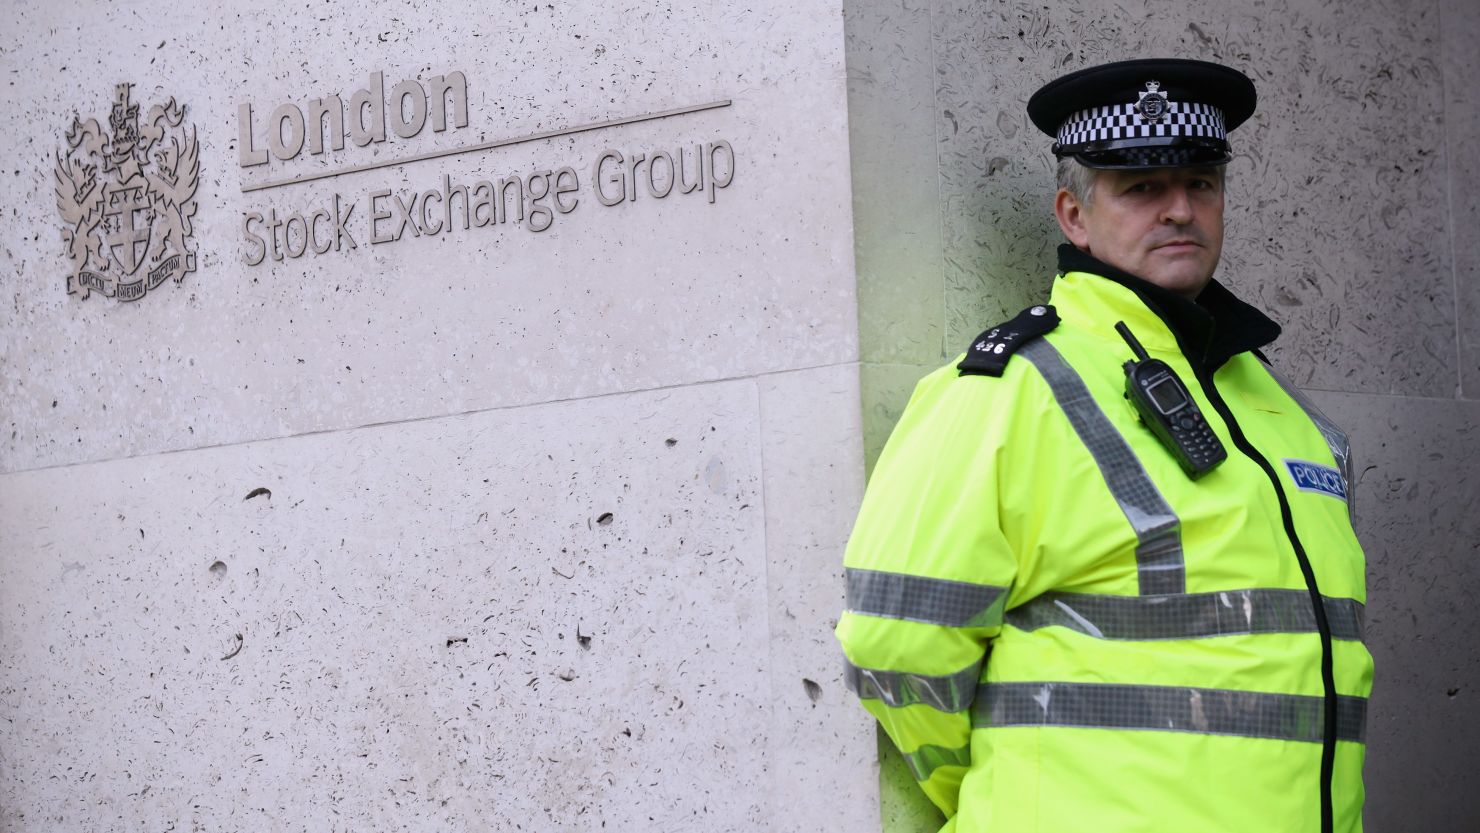 A police officer stands guard in front of the London Stock Exchange, October 17, 2011.